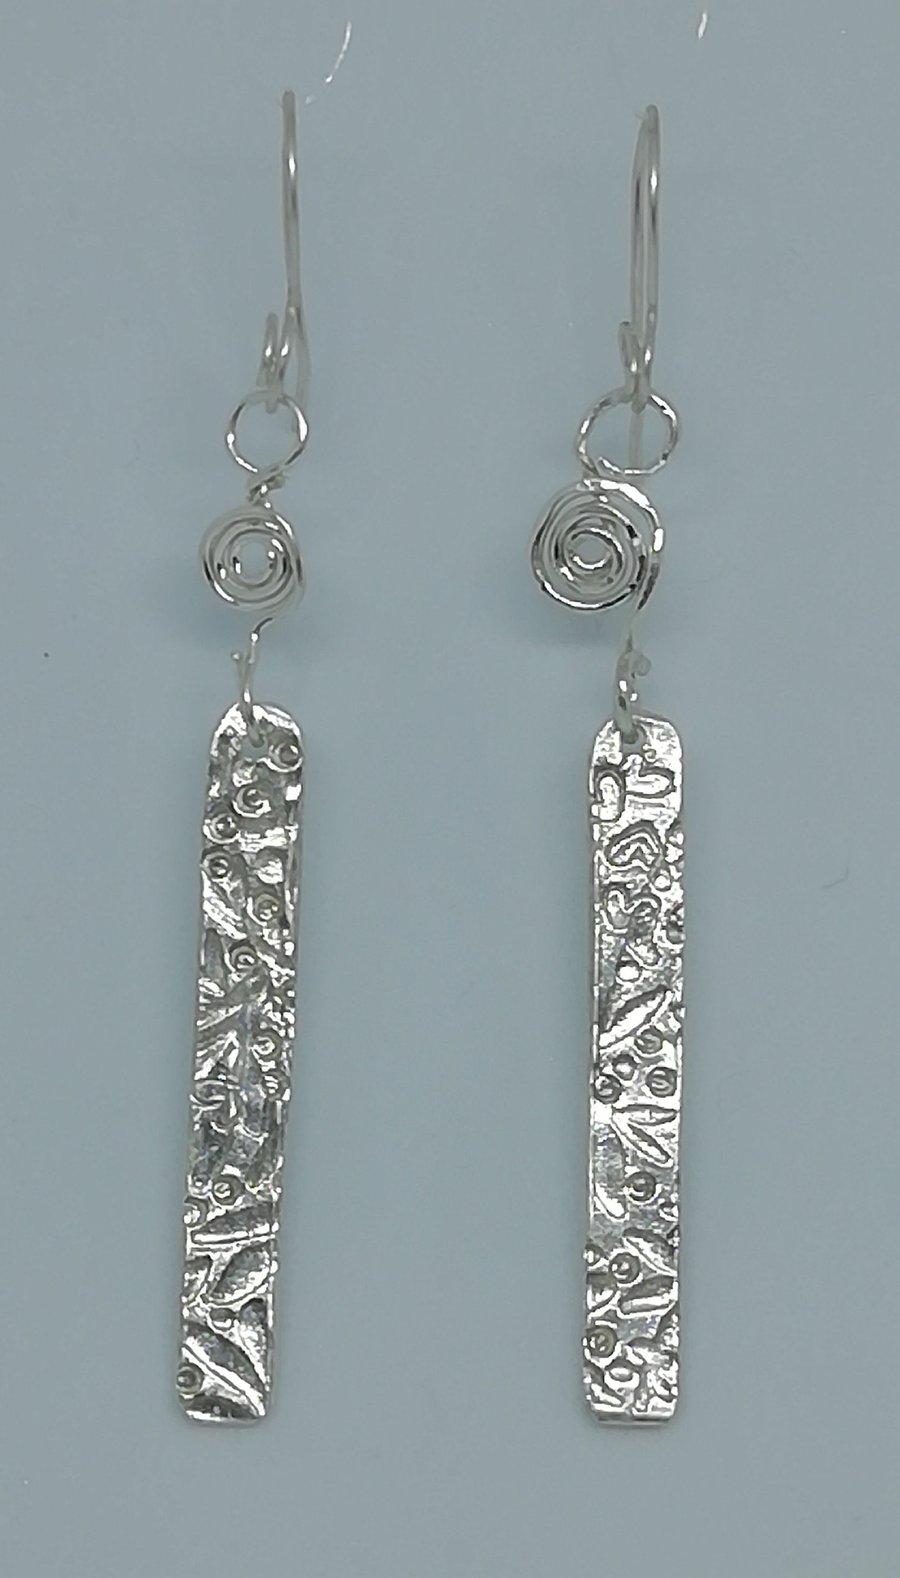 Stunning Silver Floral and Coil Earrings